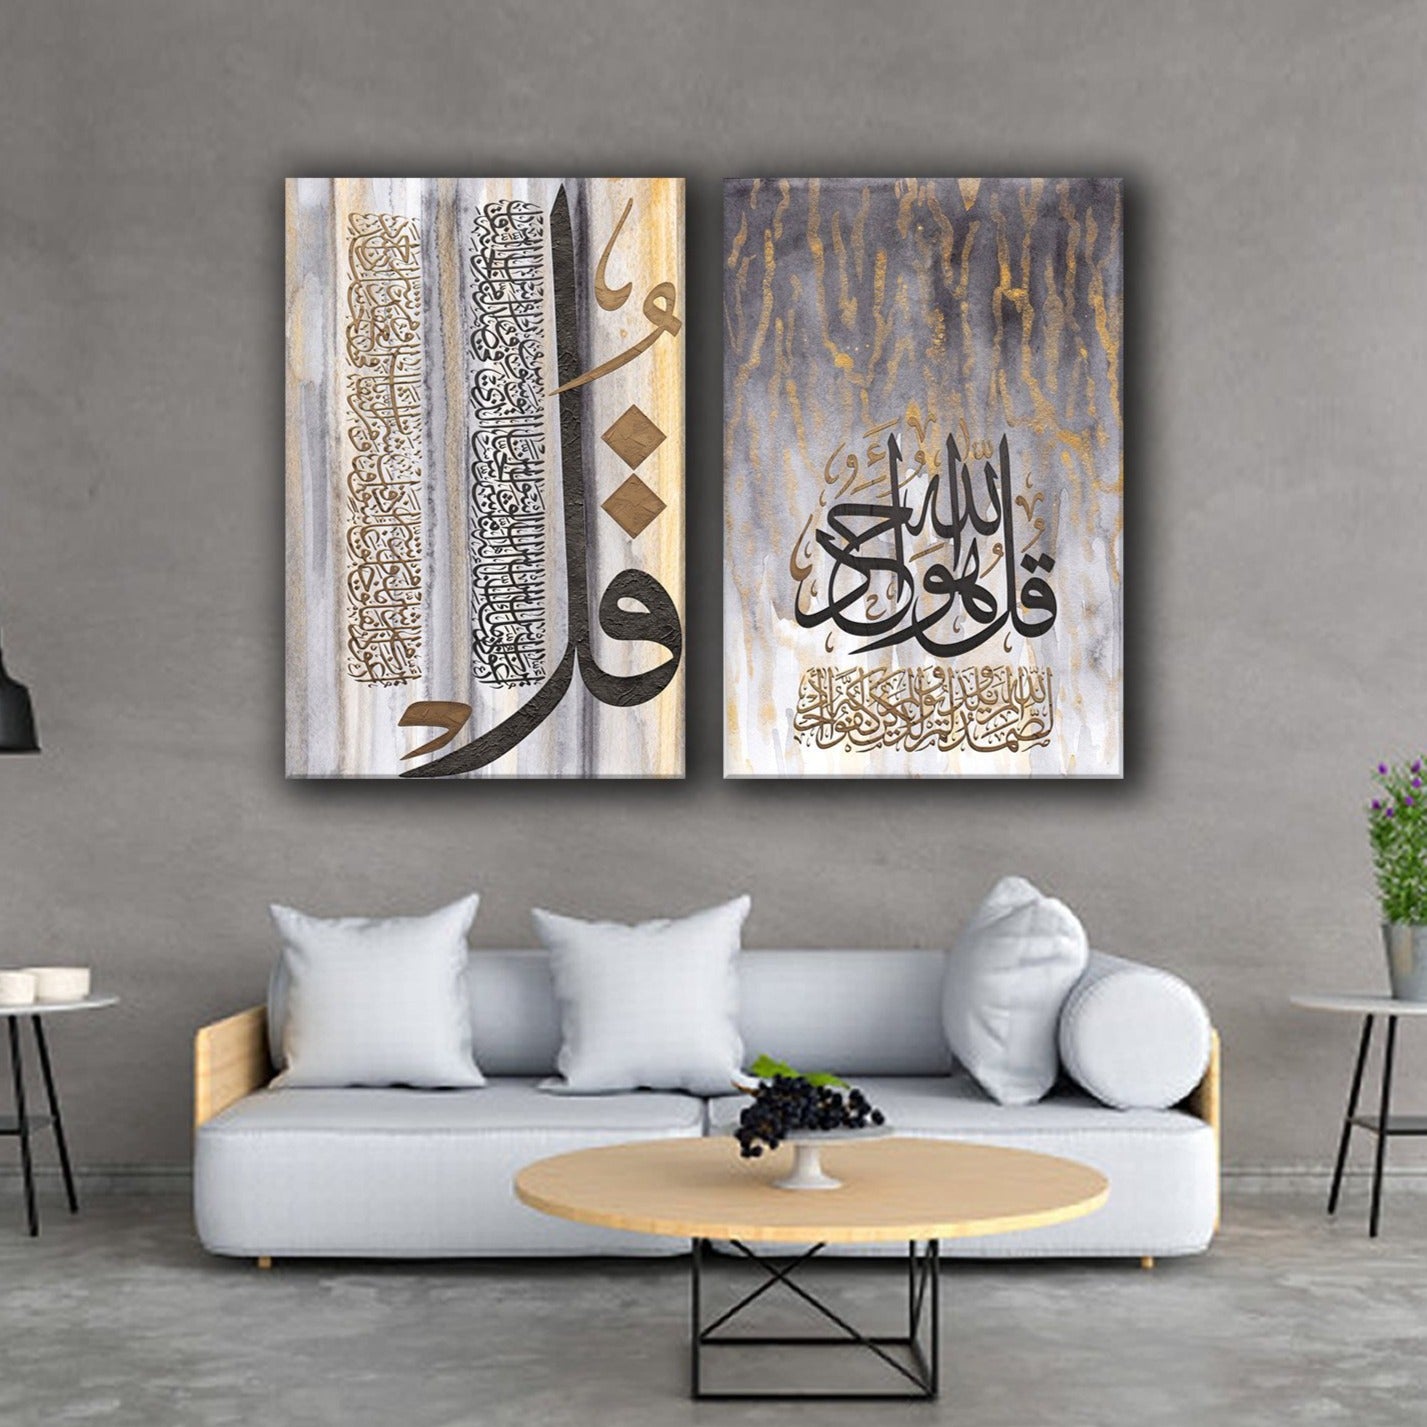 Modern Islamic Wall Art from Arab Canvas, showcasing the 3 Quls in stunning Arabic calligraphy, rendered in shades of grey, brown, gold, and white.